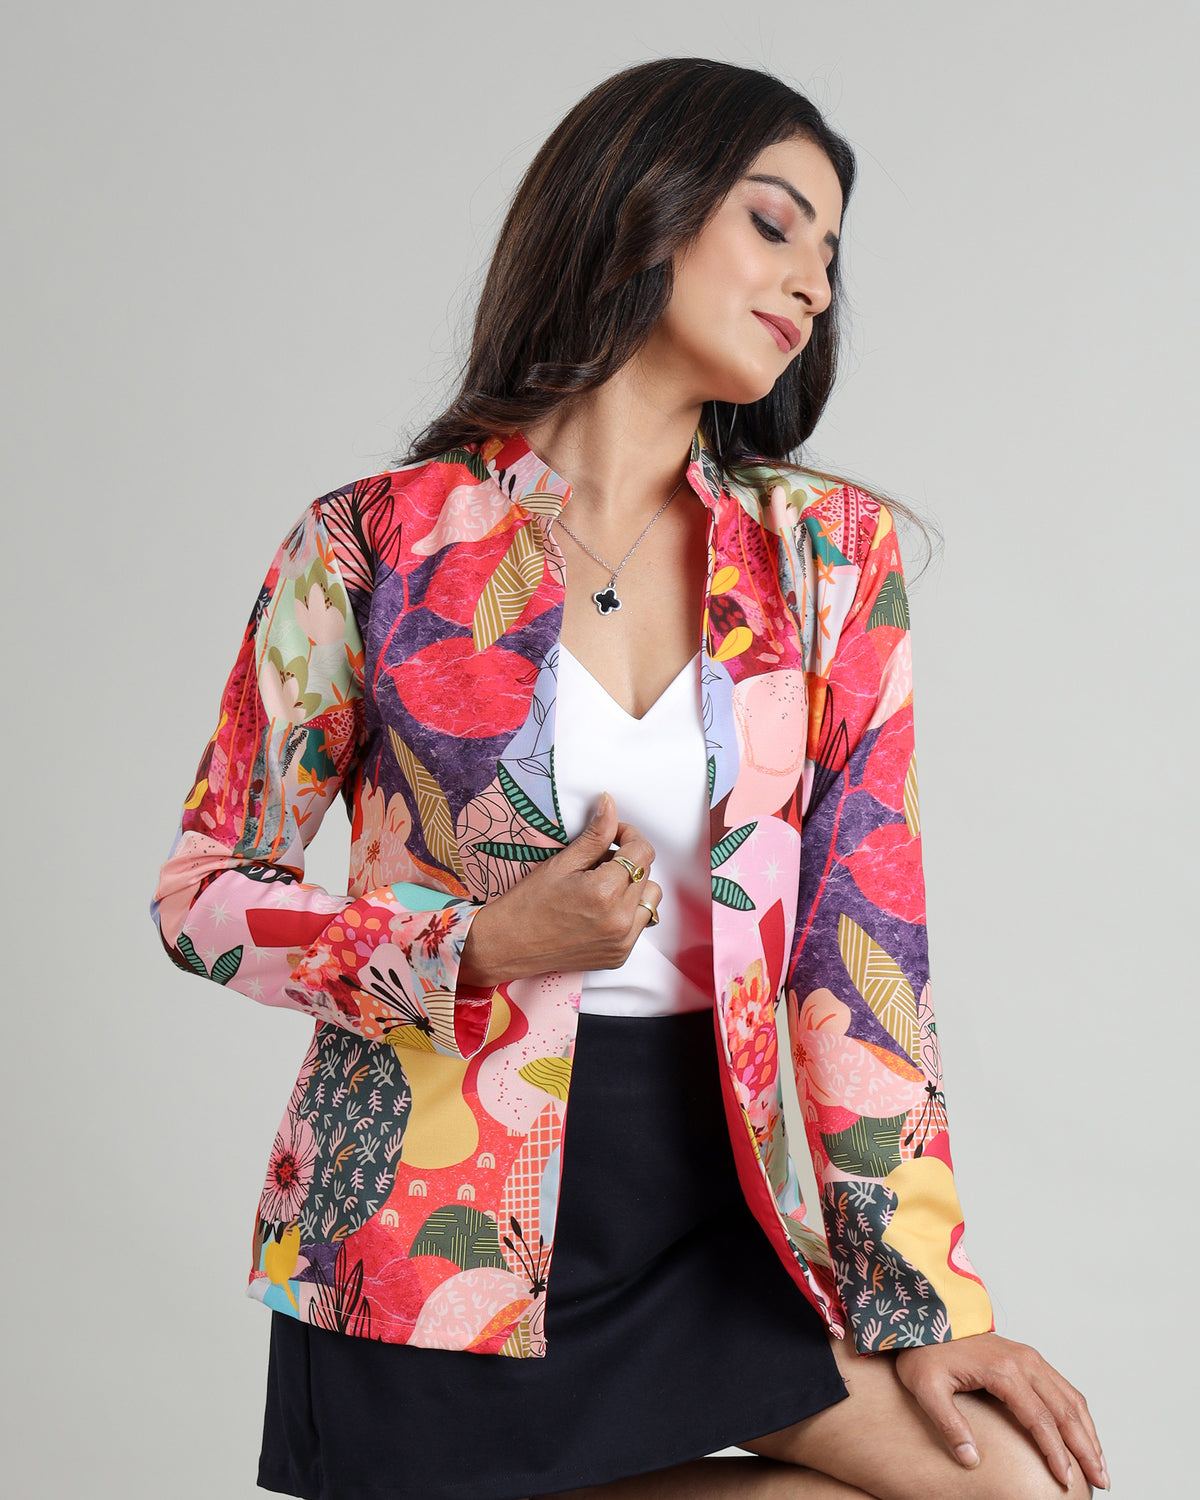 The Showstopper: Women's Abstract Floral Jacket